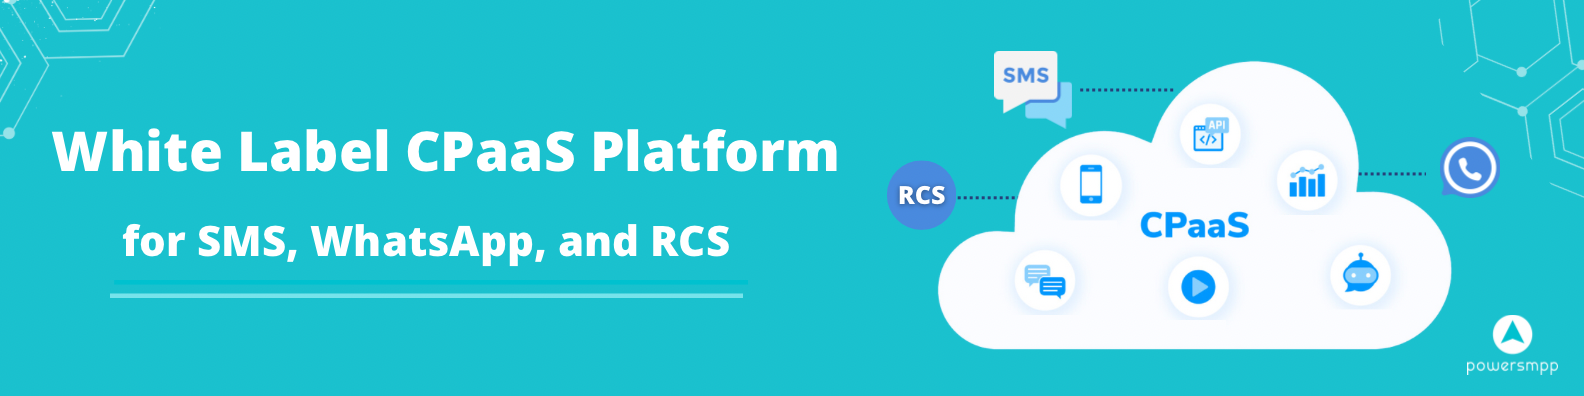 White Label CPaaS Platform for SMS, WhatsApp, and RCS